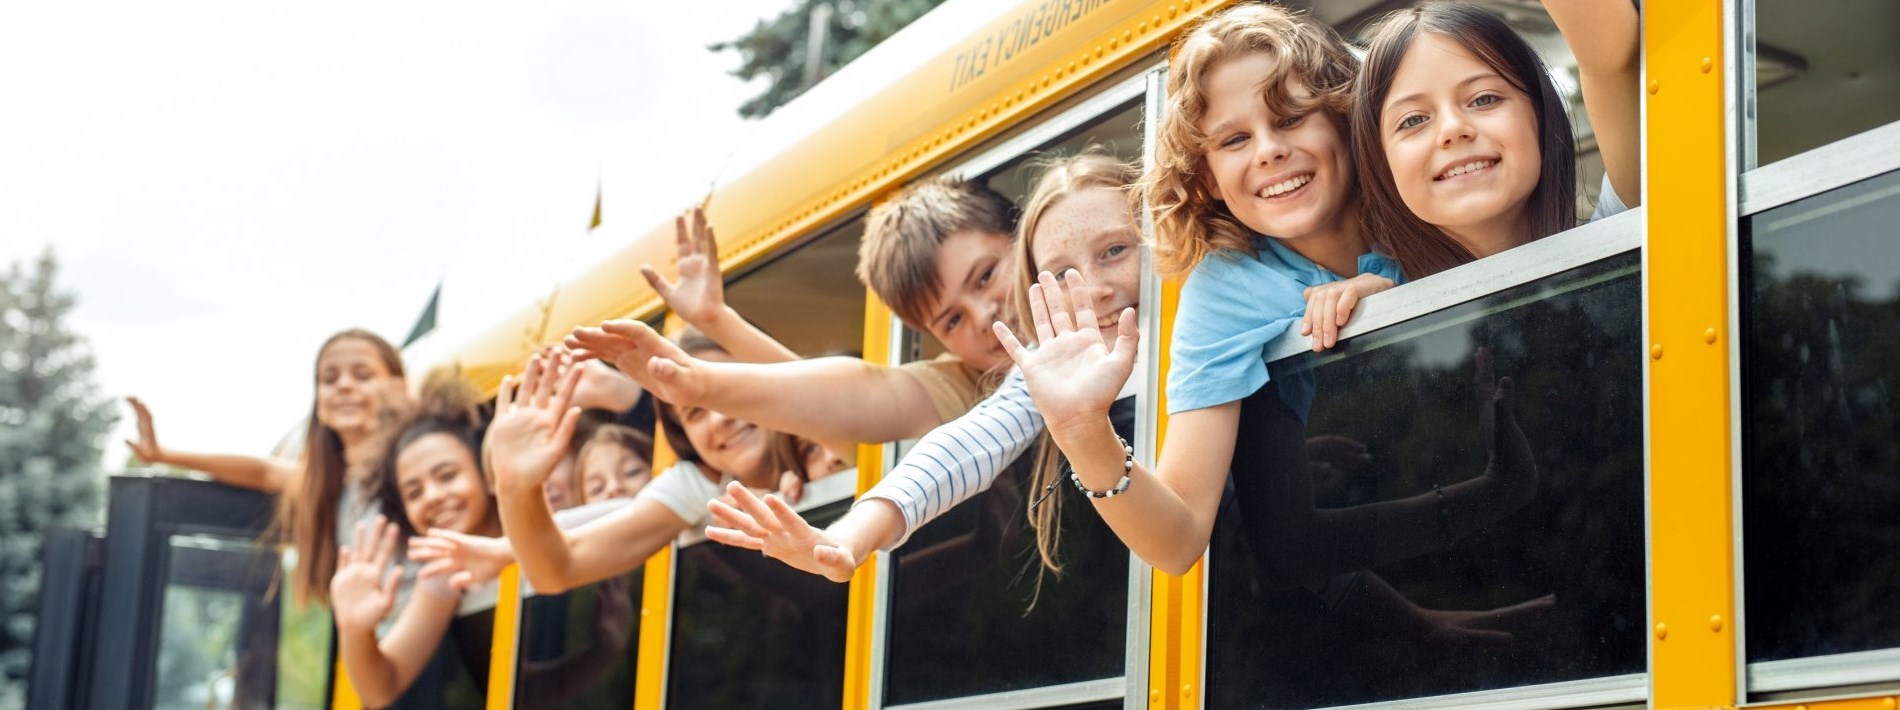 children waving from the window of a school bus